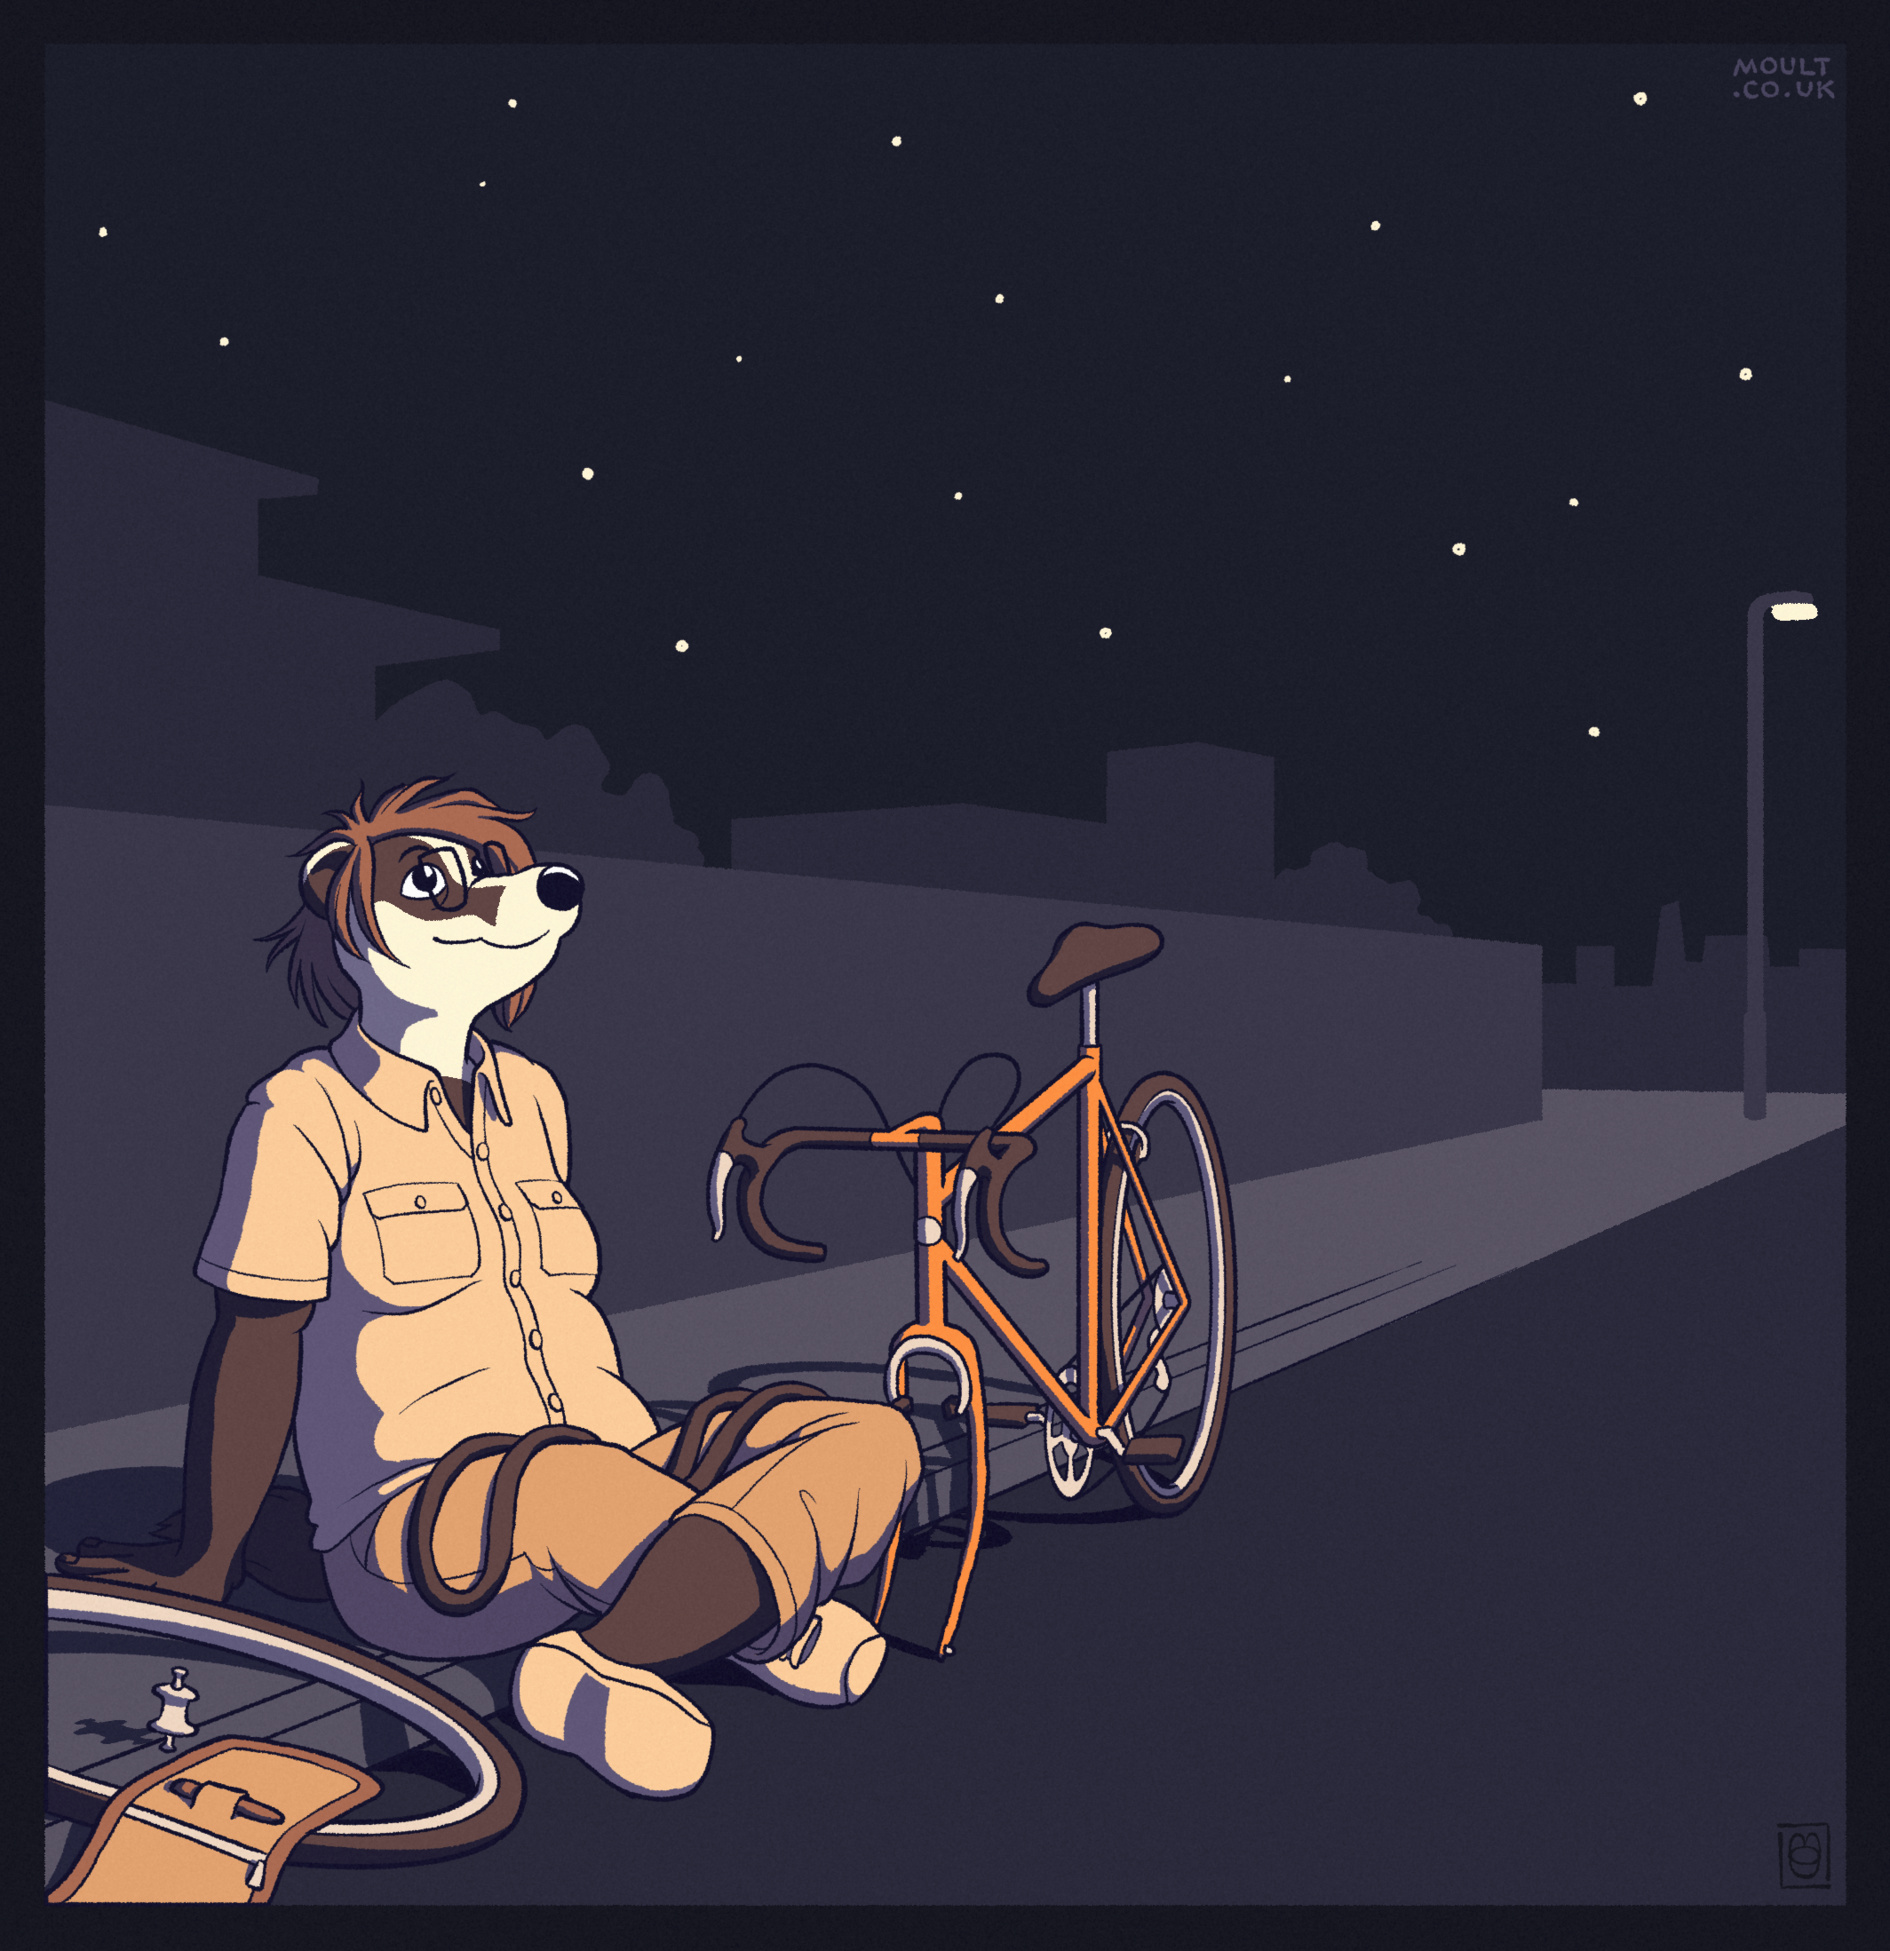 a badger woman sitting on the kerb of a city street at night. she has taken the front wheel off her bicycle, and seems to have been mending an inner tube puncture, but is now leaning back, looking up at the stars